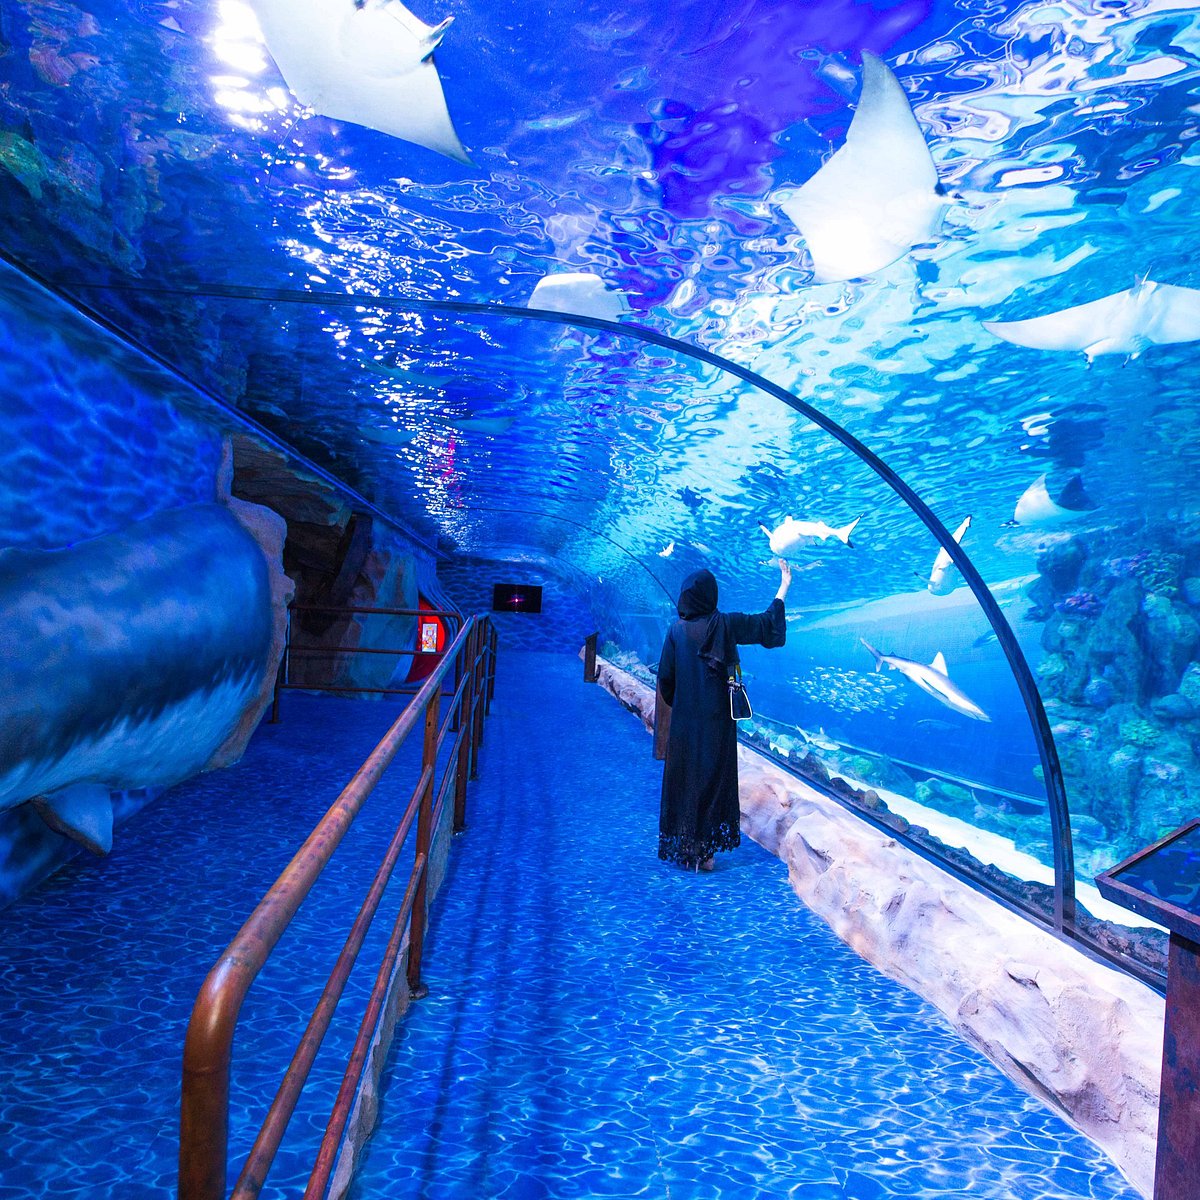 Dubai Aquarium & Underwater Zoo - All You Need to Know BEFORE You